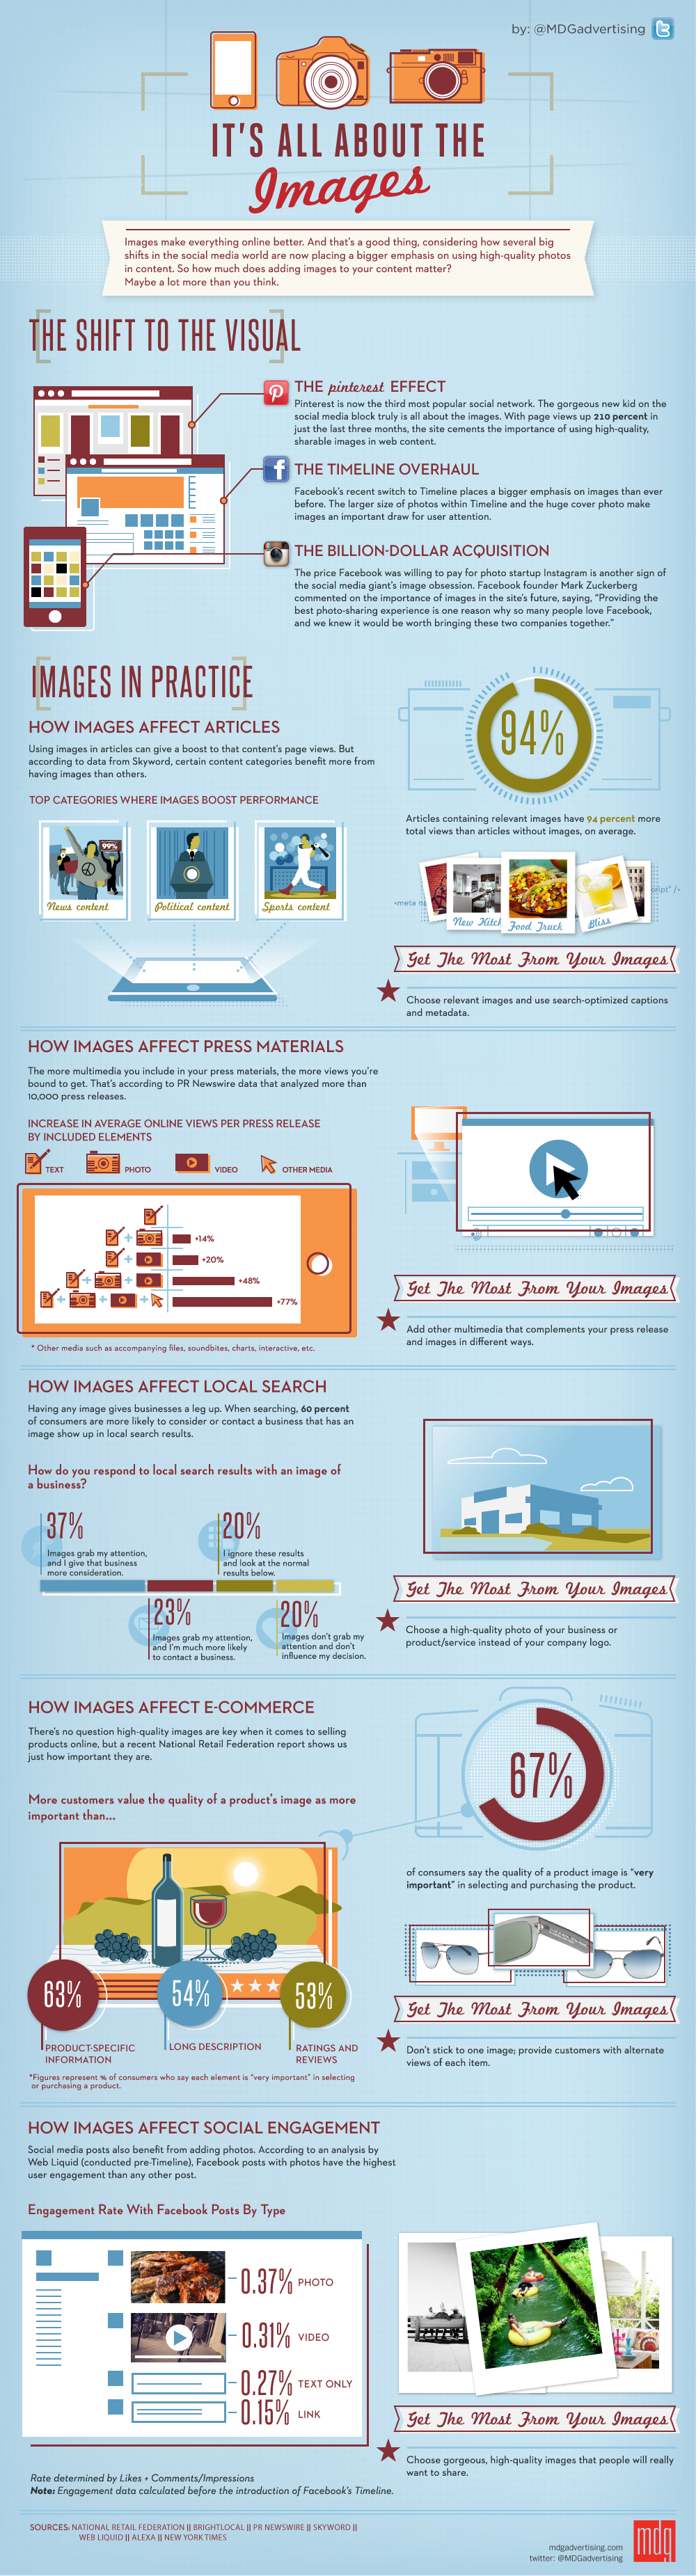 seo images infographic